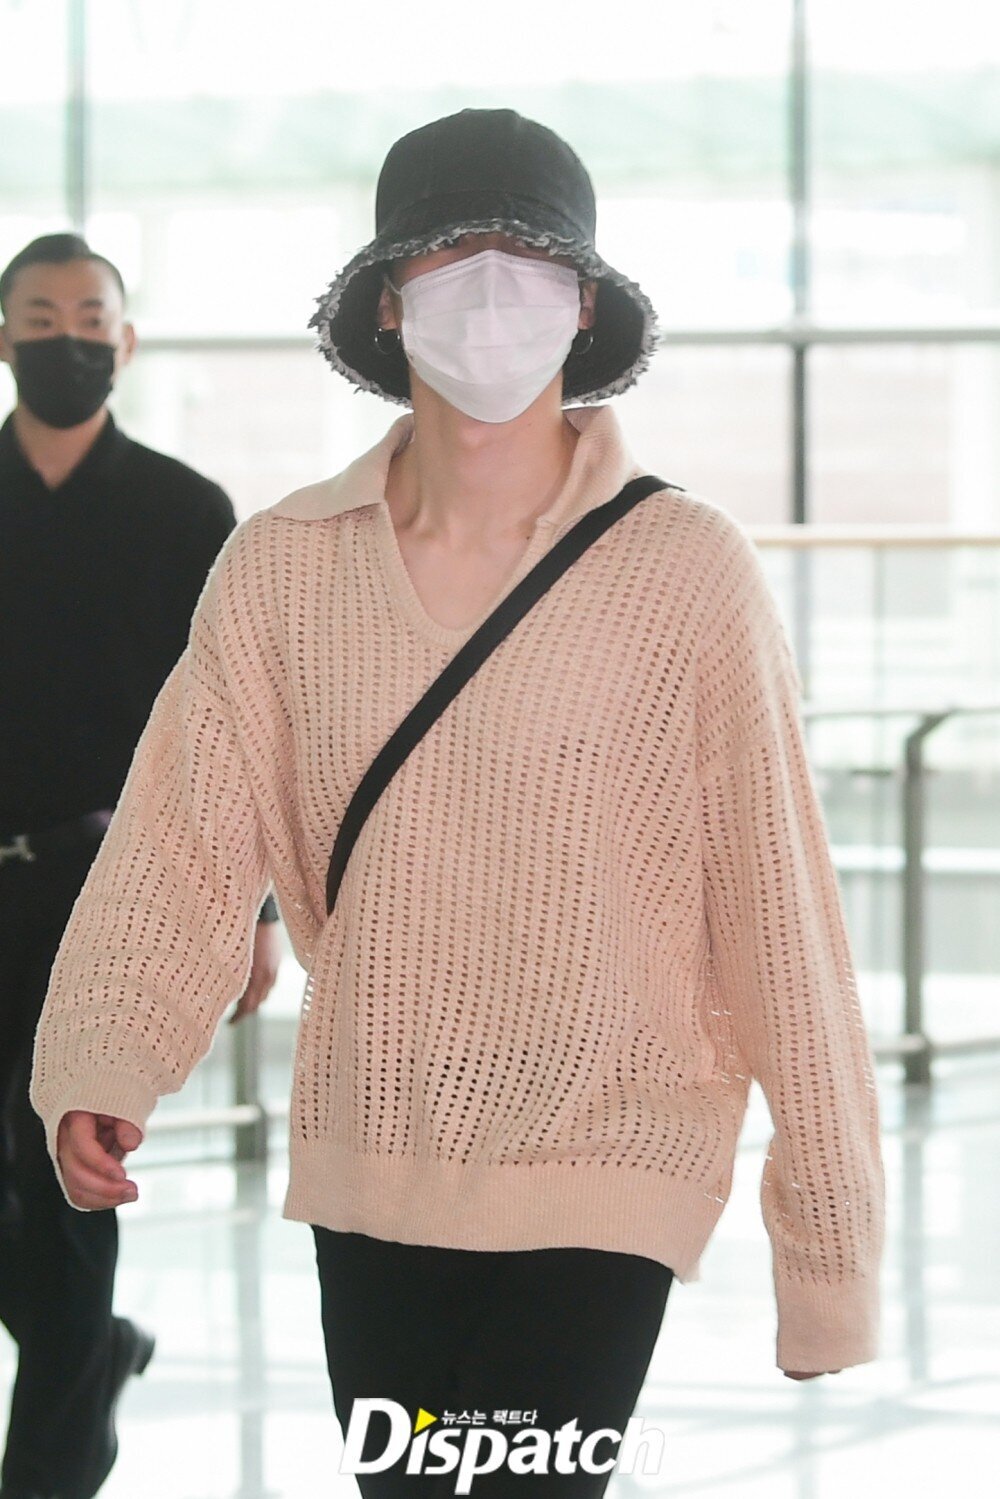 BTS's Jimin is spotted at the Incheon International Airport departing for  the U.S.